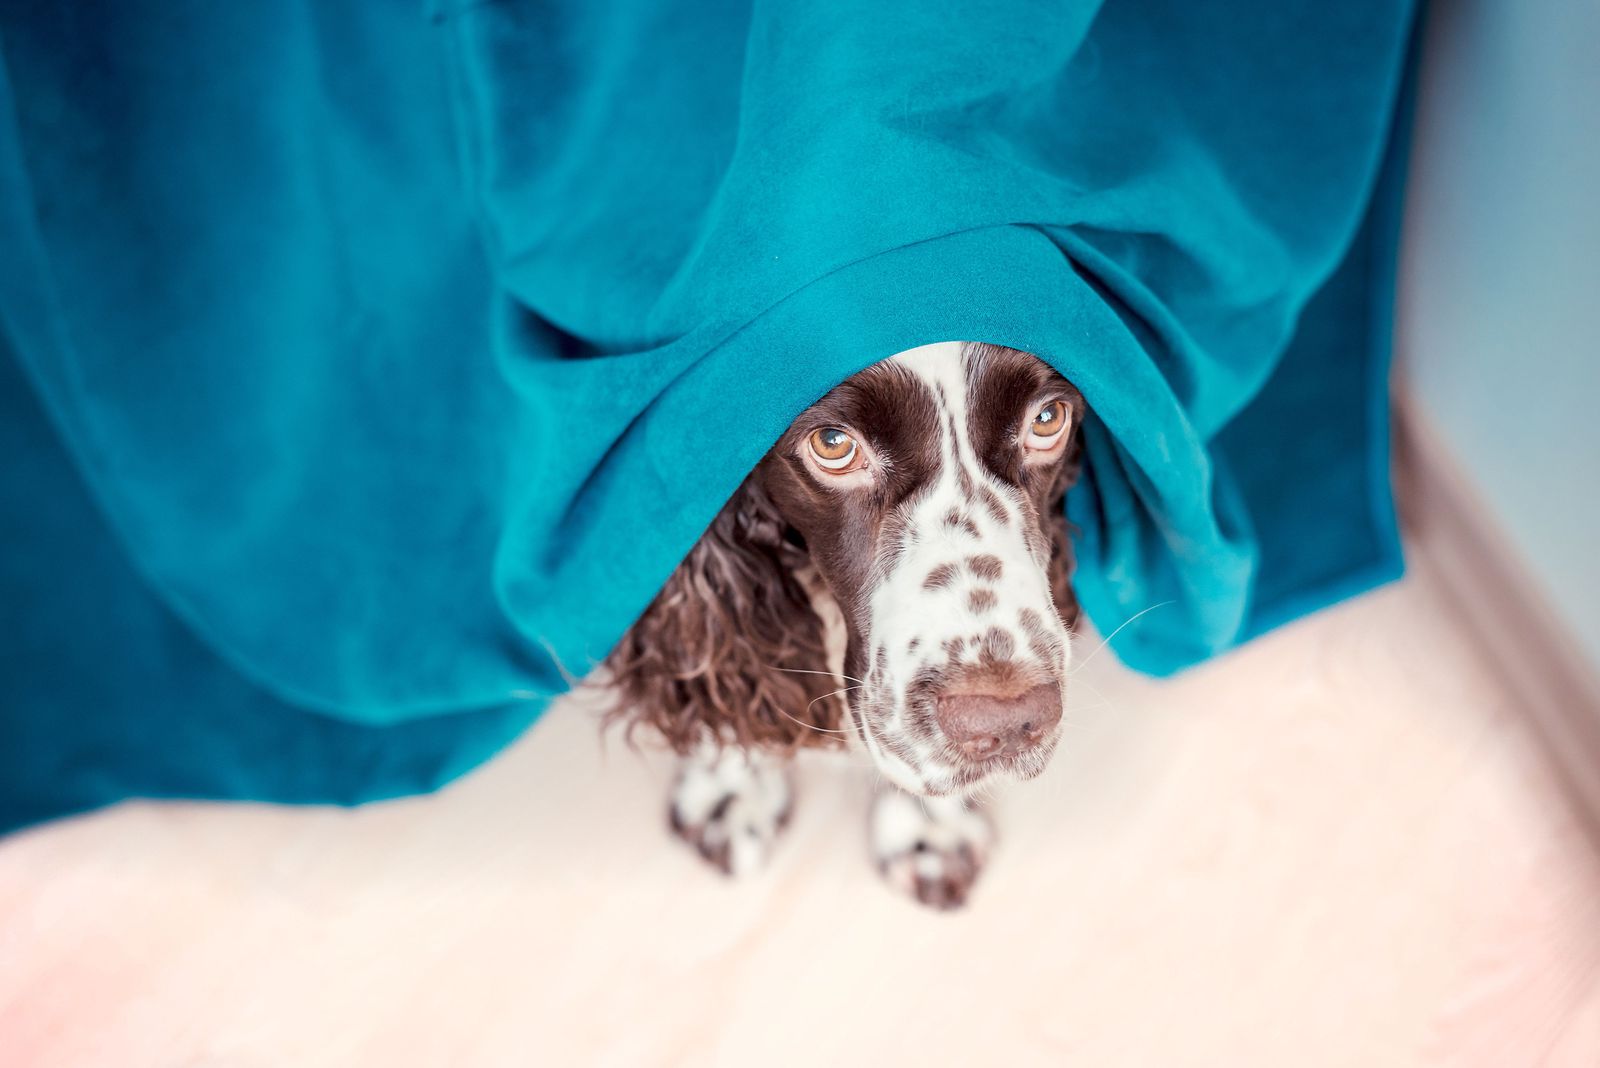 Is your dog stressed? What we can do as pet parents - Dog peeking out from under a curtain